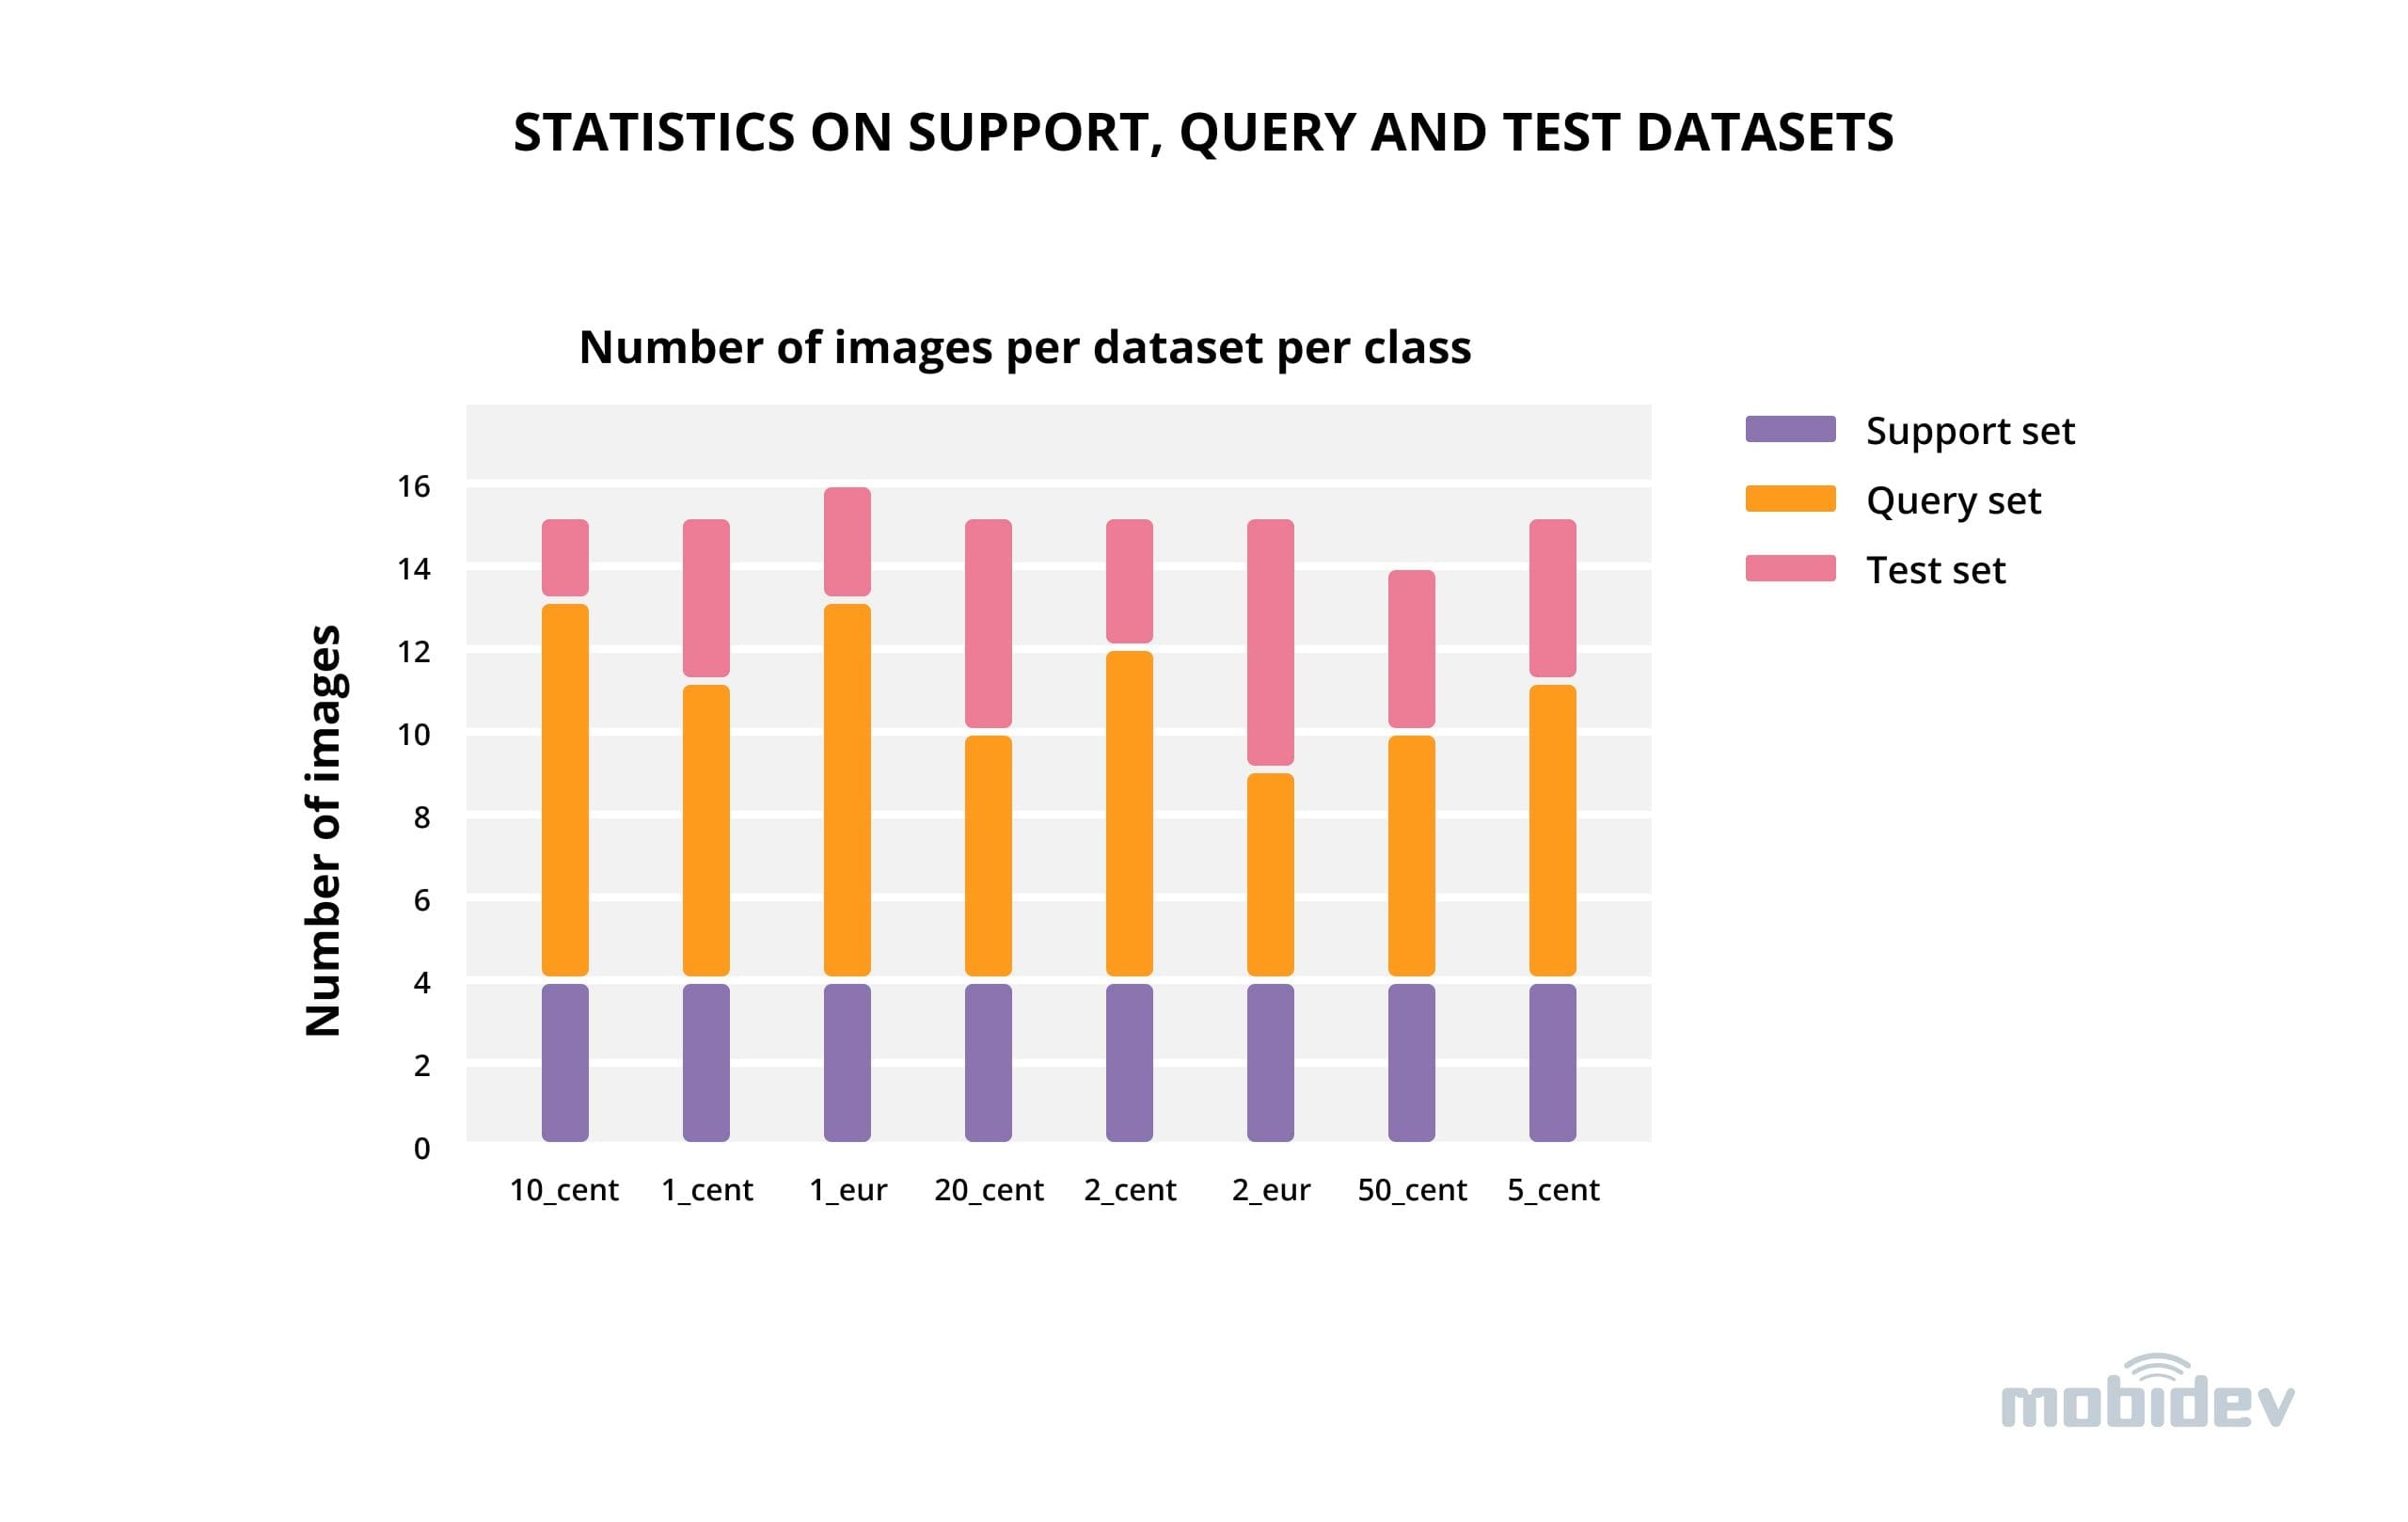 Figure 4. Statistics on support, query, and test datasets